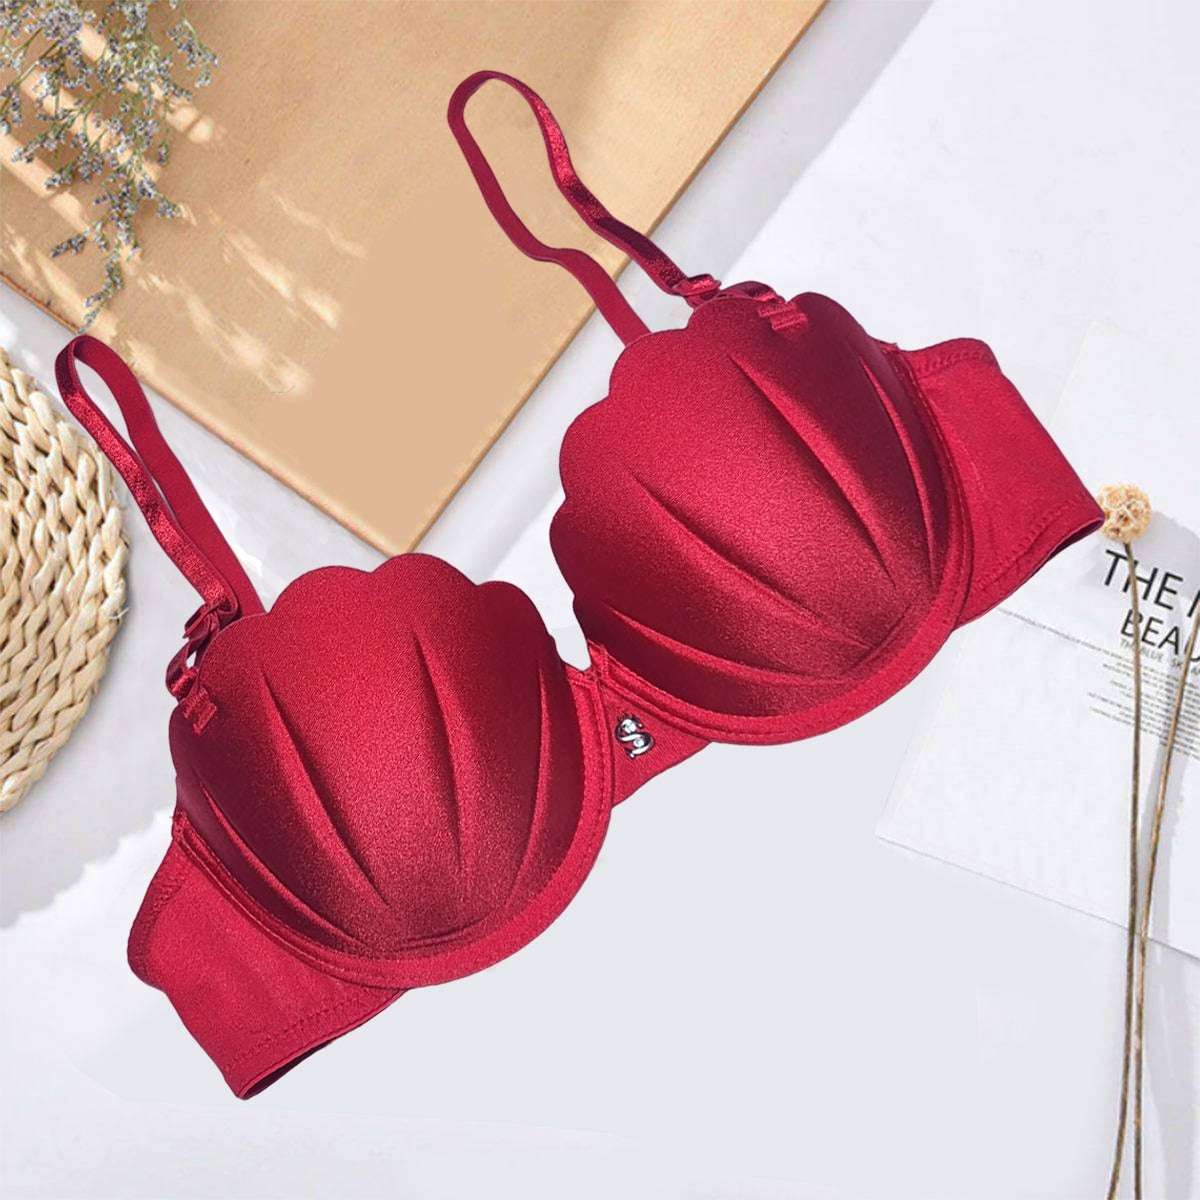 Flourish Perfect Lift Padded Wired Push-up Bra Plus Sizes Price in Pakistan  - View Latest Collection of Bras